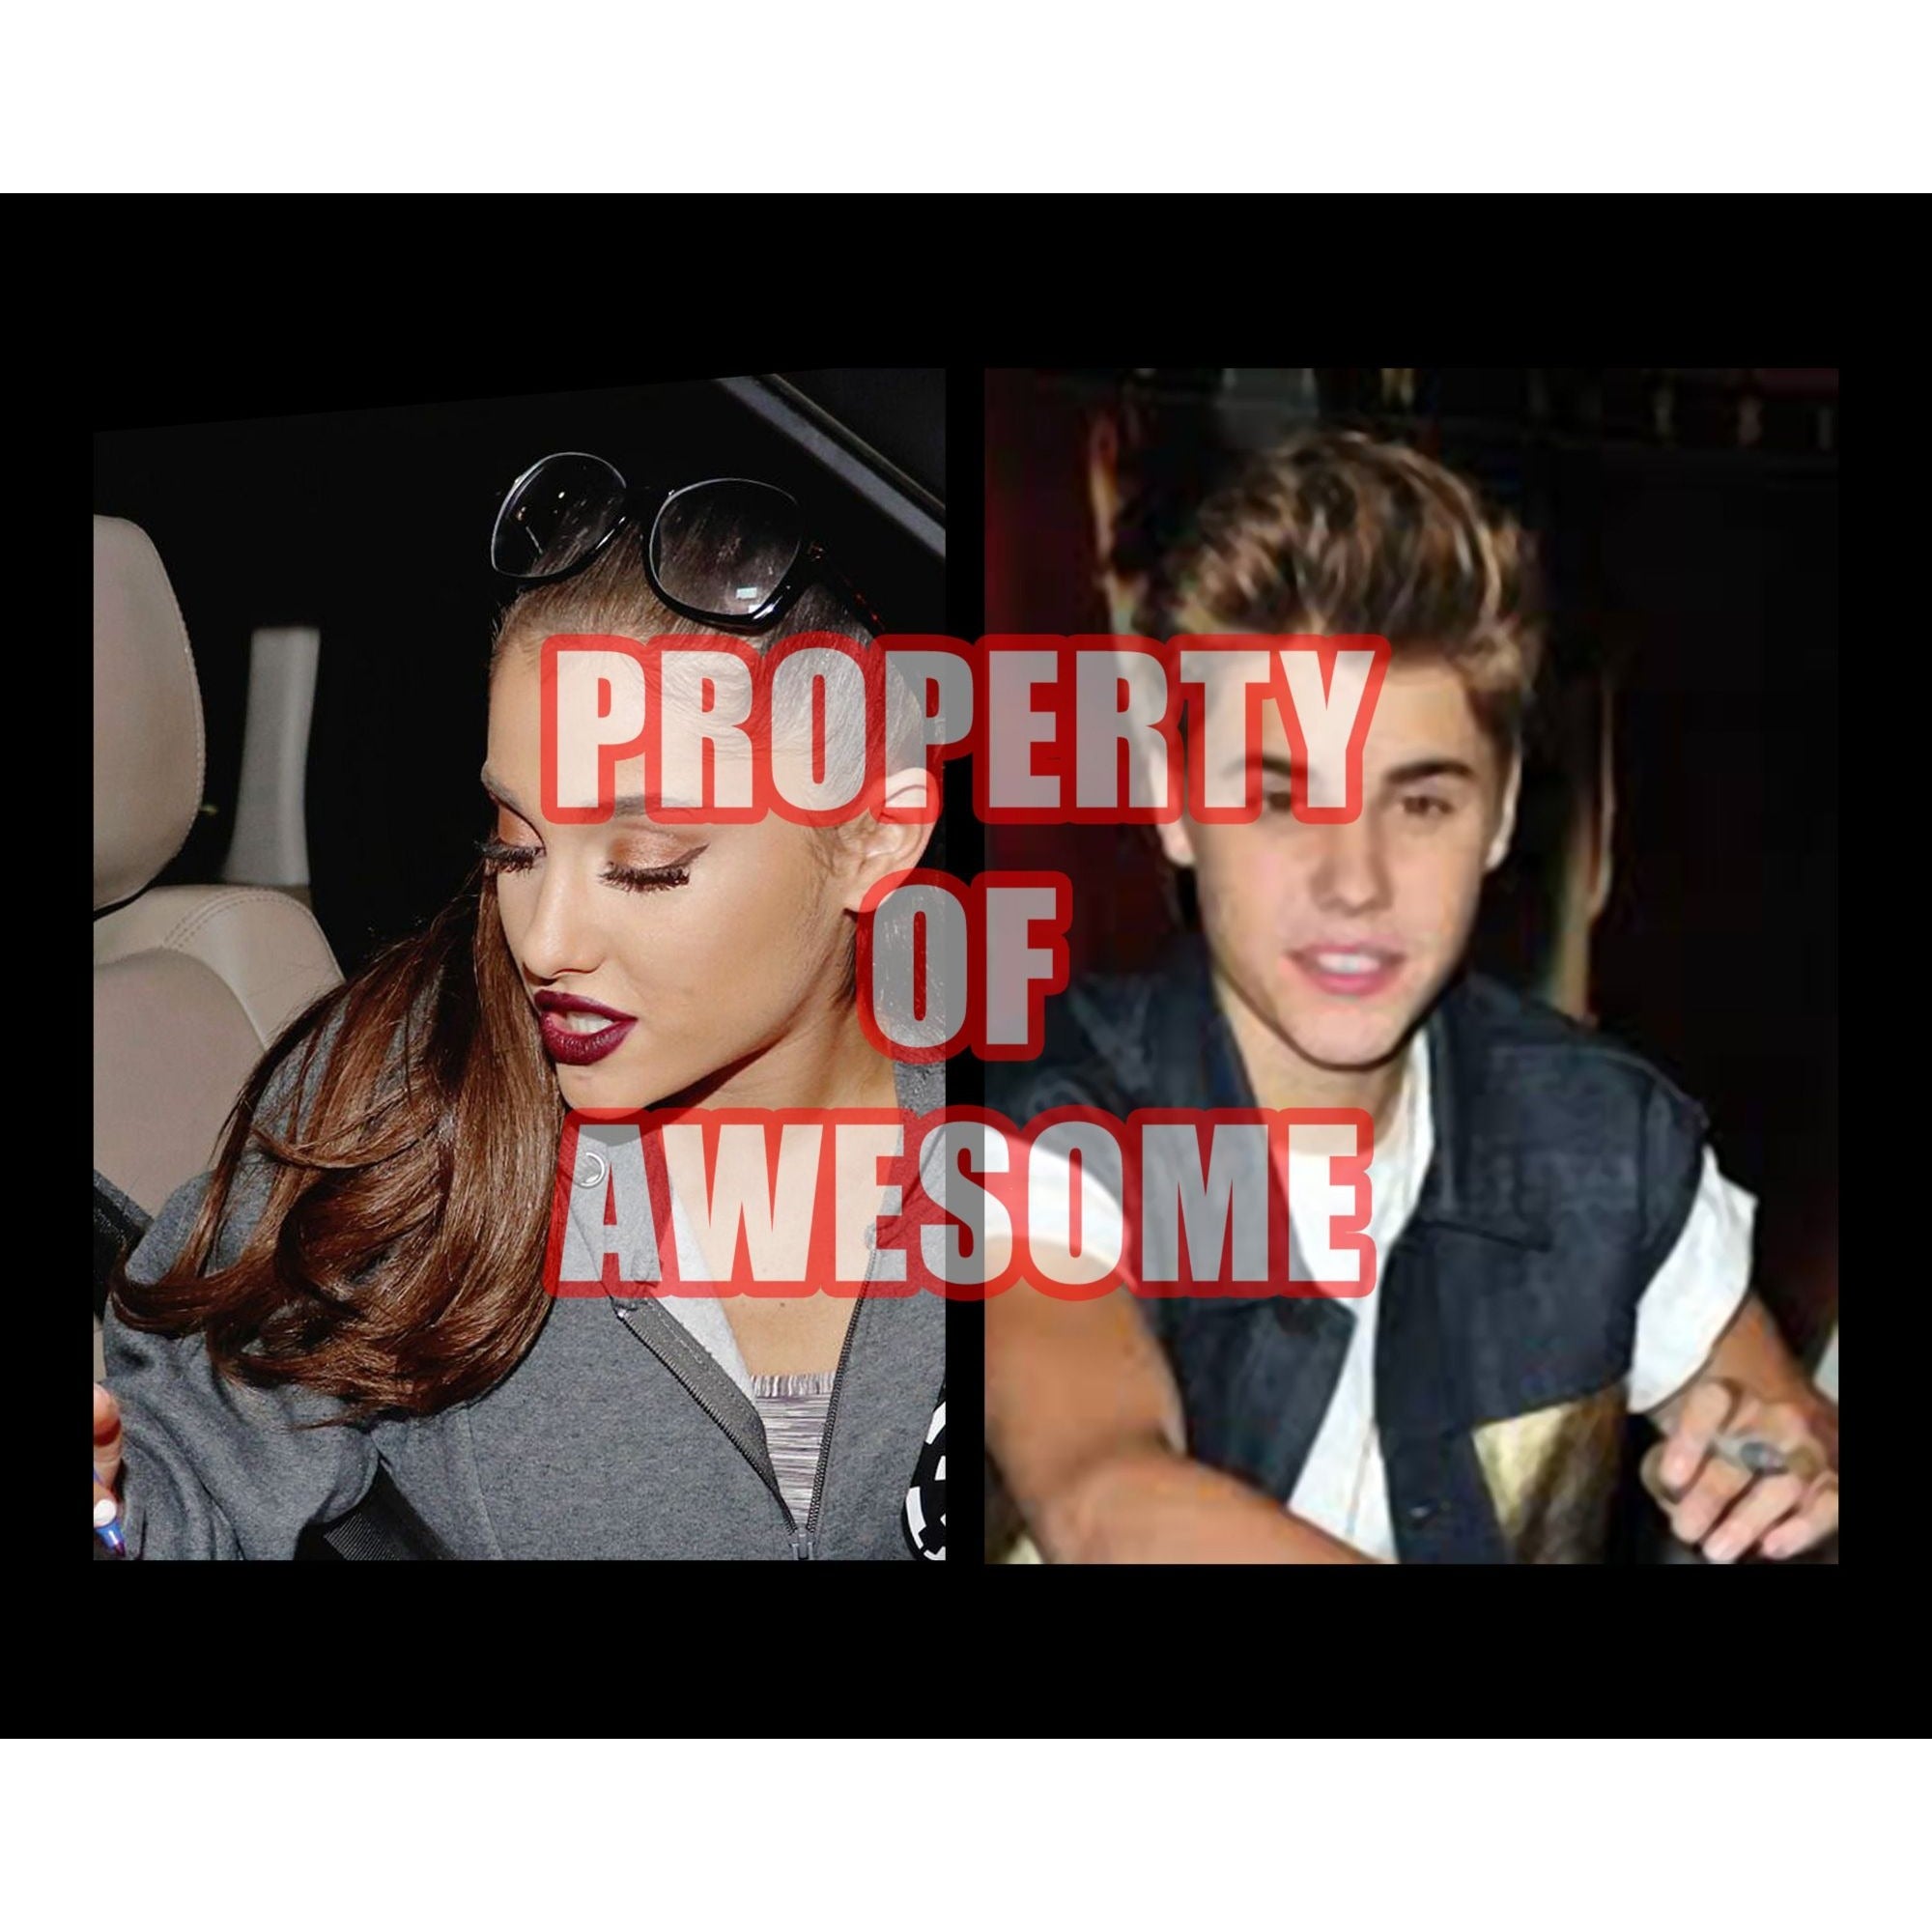 Ariana Grande and Justin Bieber 8 by 10 signed photo with proof